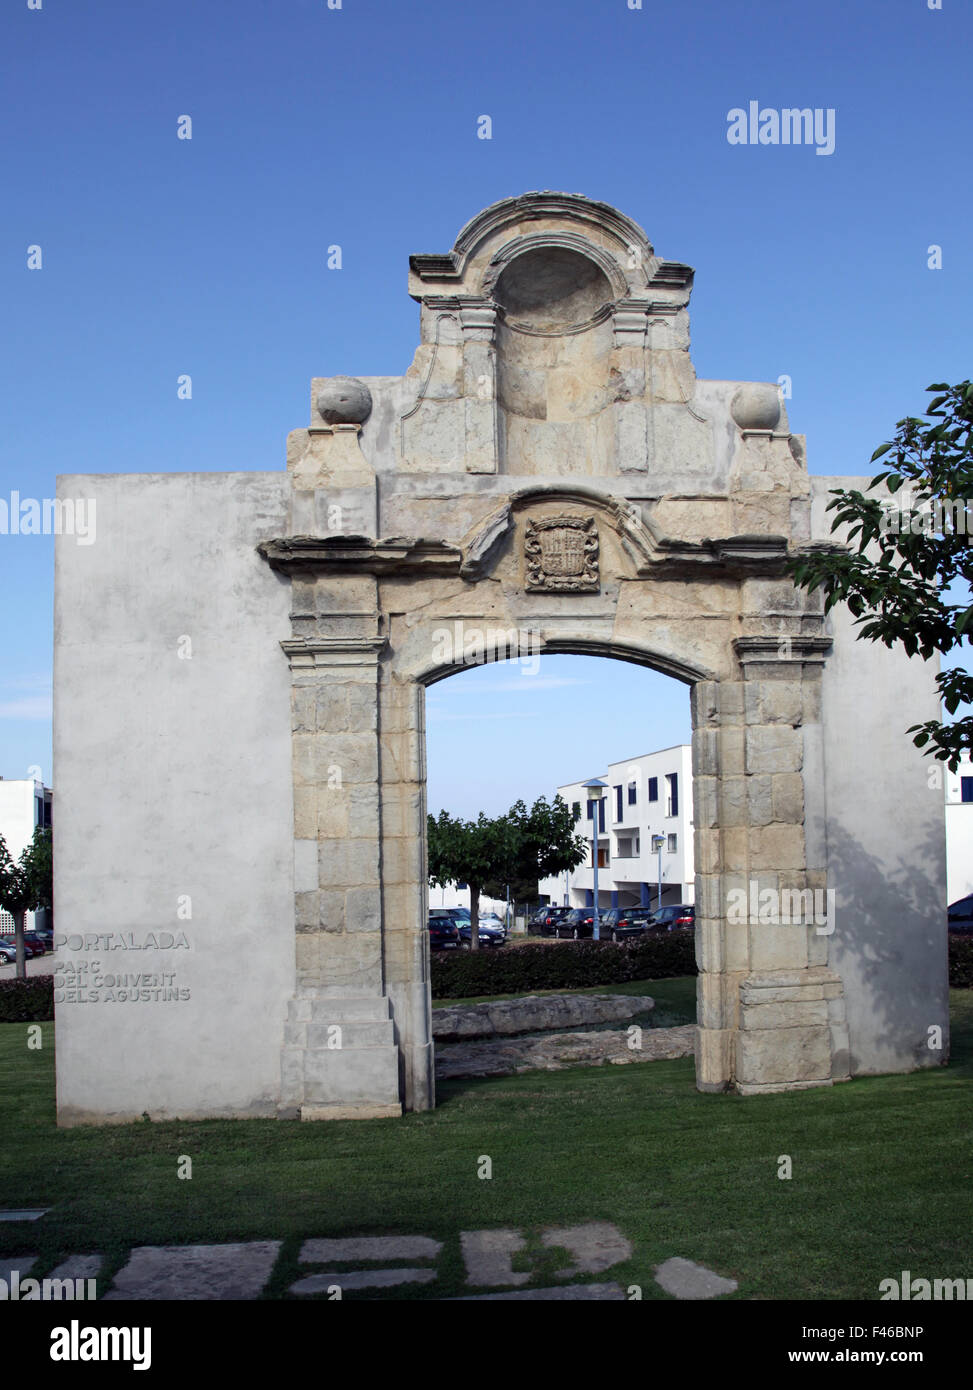 The portal of Our Lady of grace church from the second augustinian monastery in Palamós Spain Costa Brava. Stock Photo